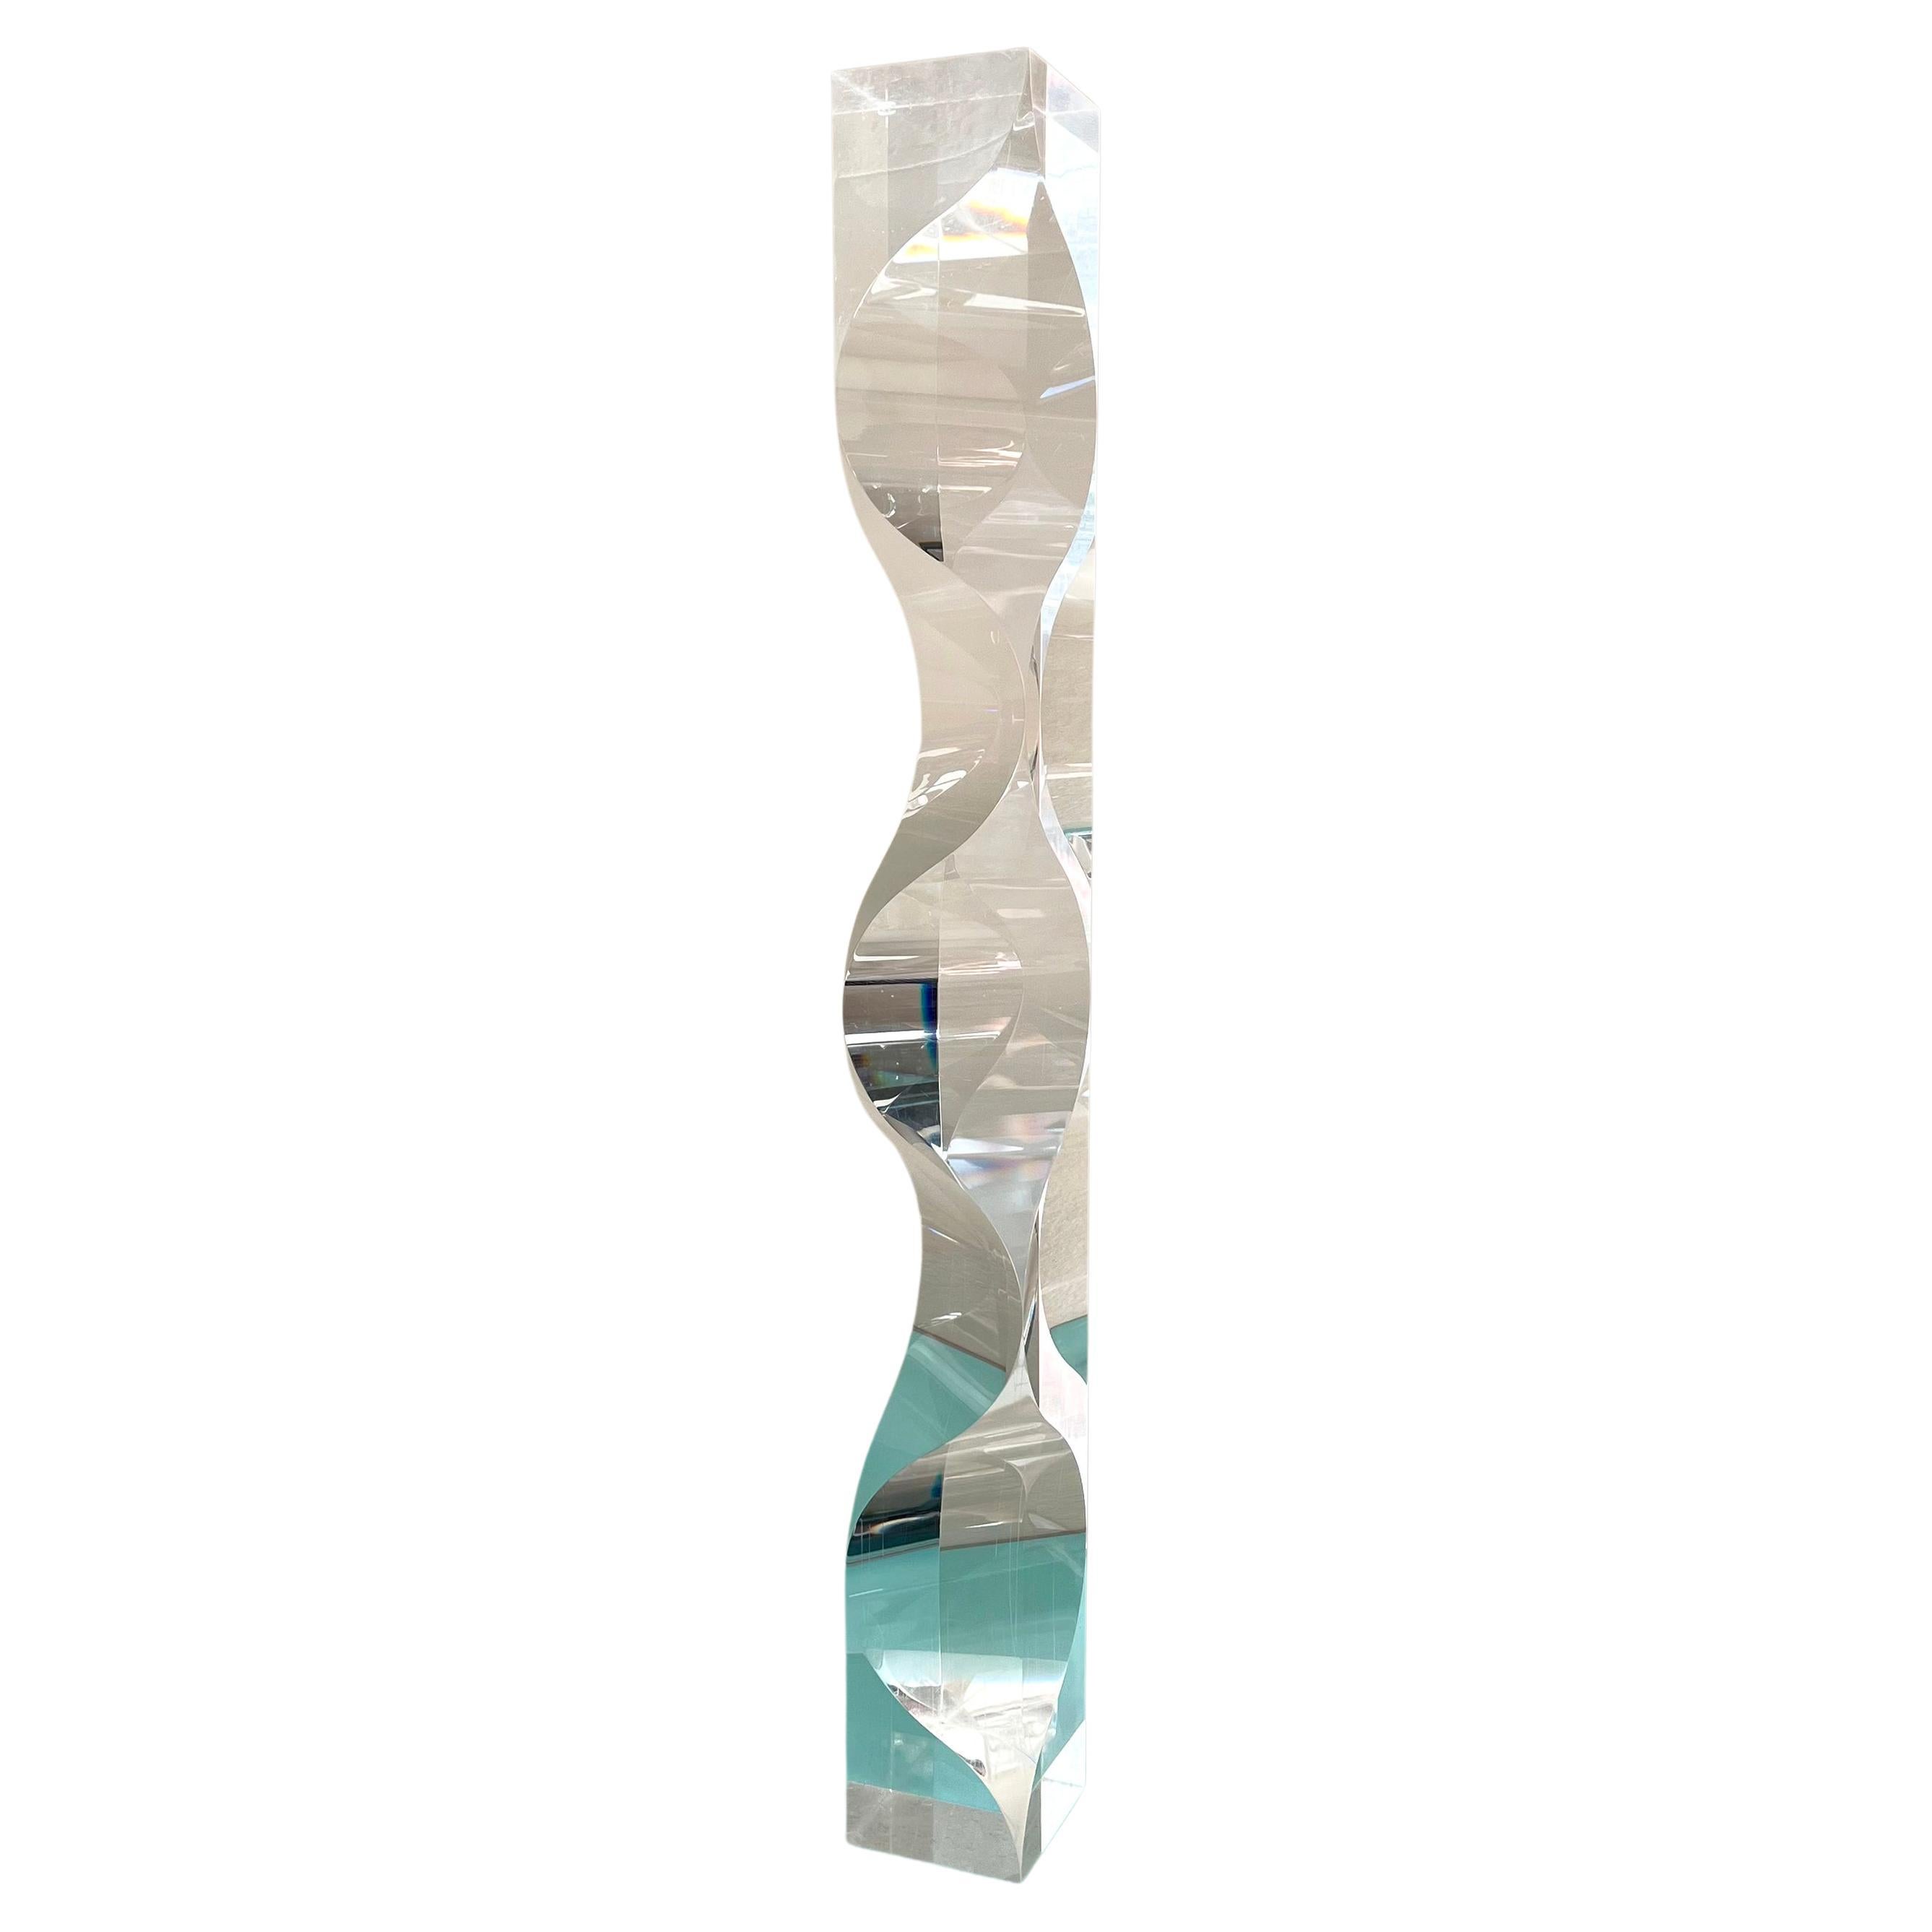 Alessio Tasca for Fusina Acrylic Lucite Prism Tower Sculpture For Sale 1